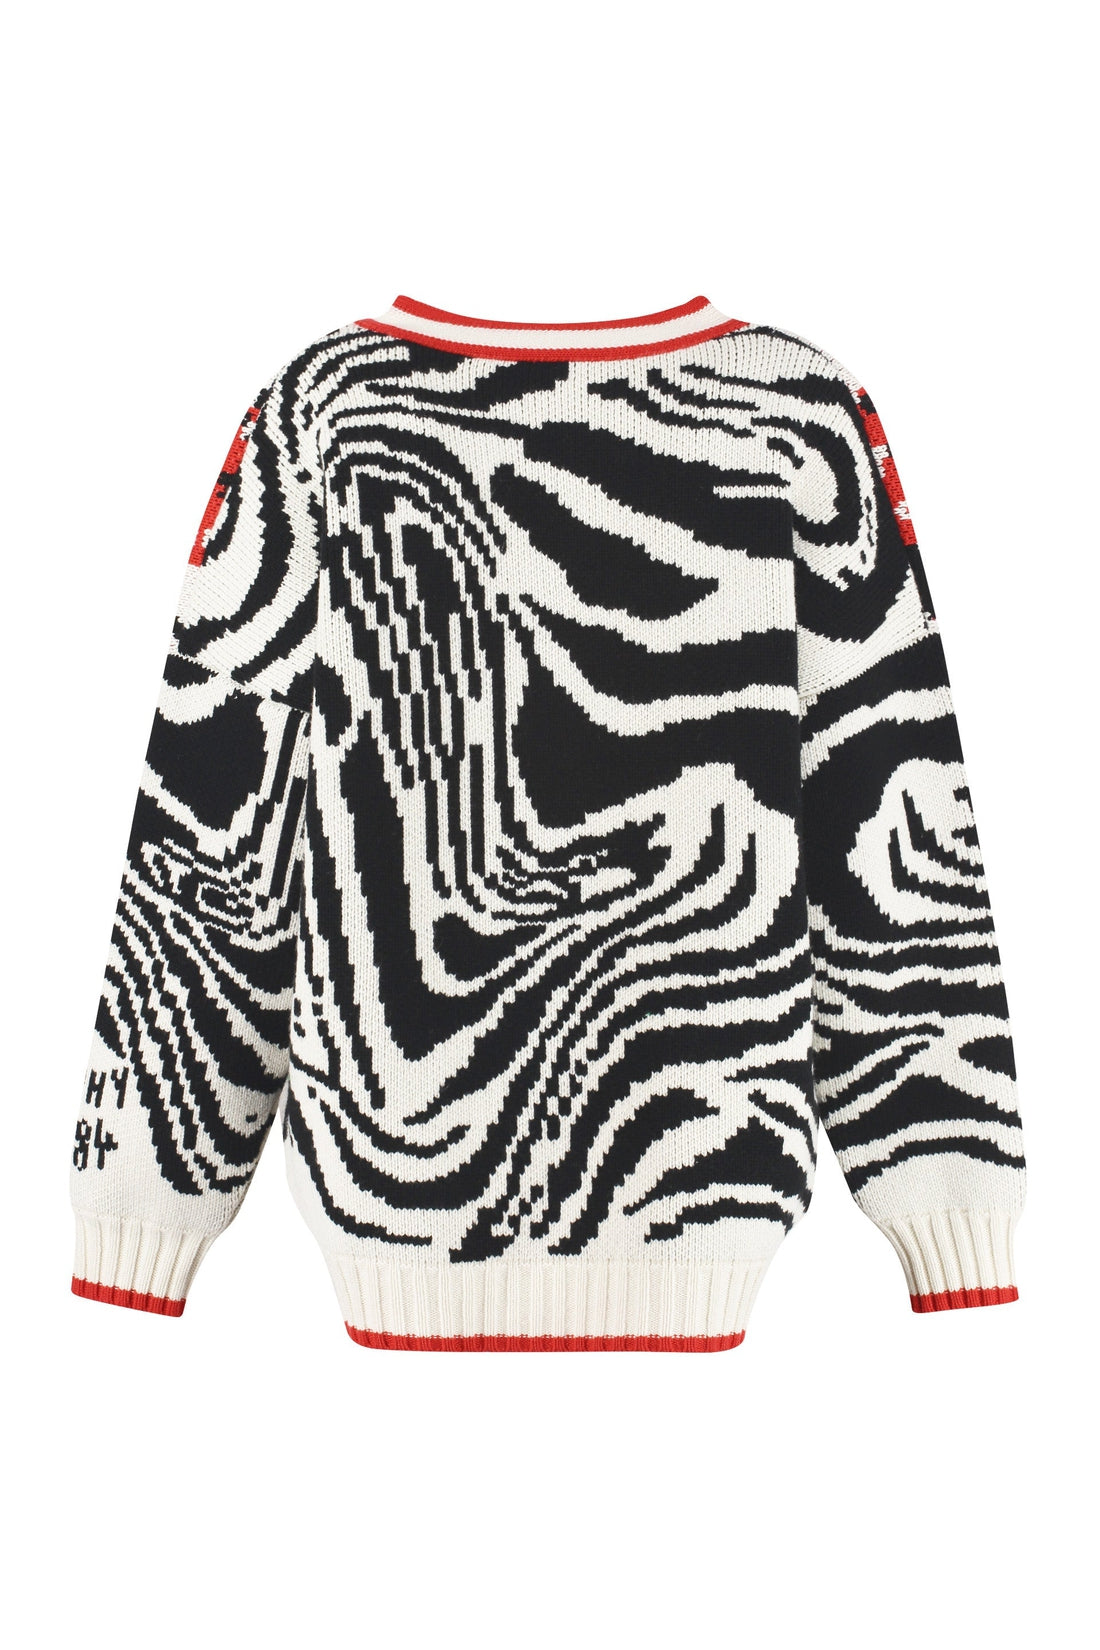 Philosophy di Lorenzo Serafini-OUTLET-SALE-Knitted cardigan-ARCHIVIST